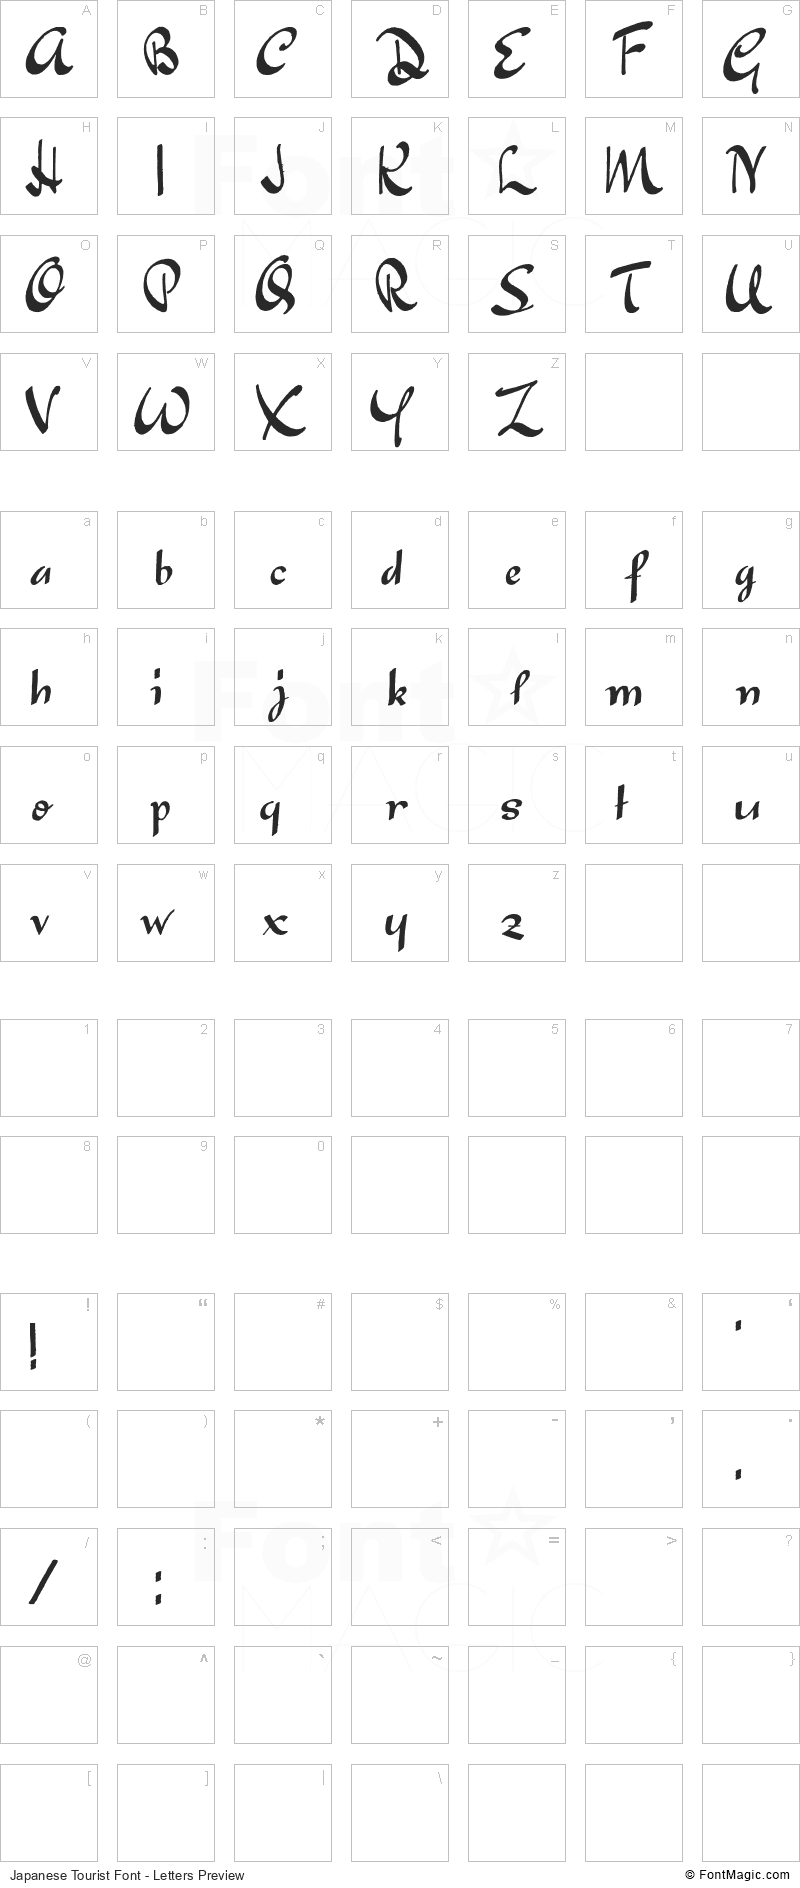 Japanese Tourist Font - All Latters Preview Chart